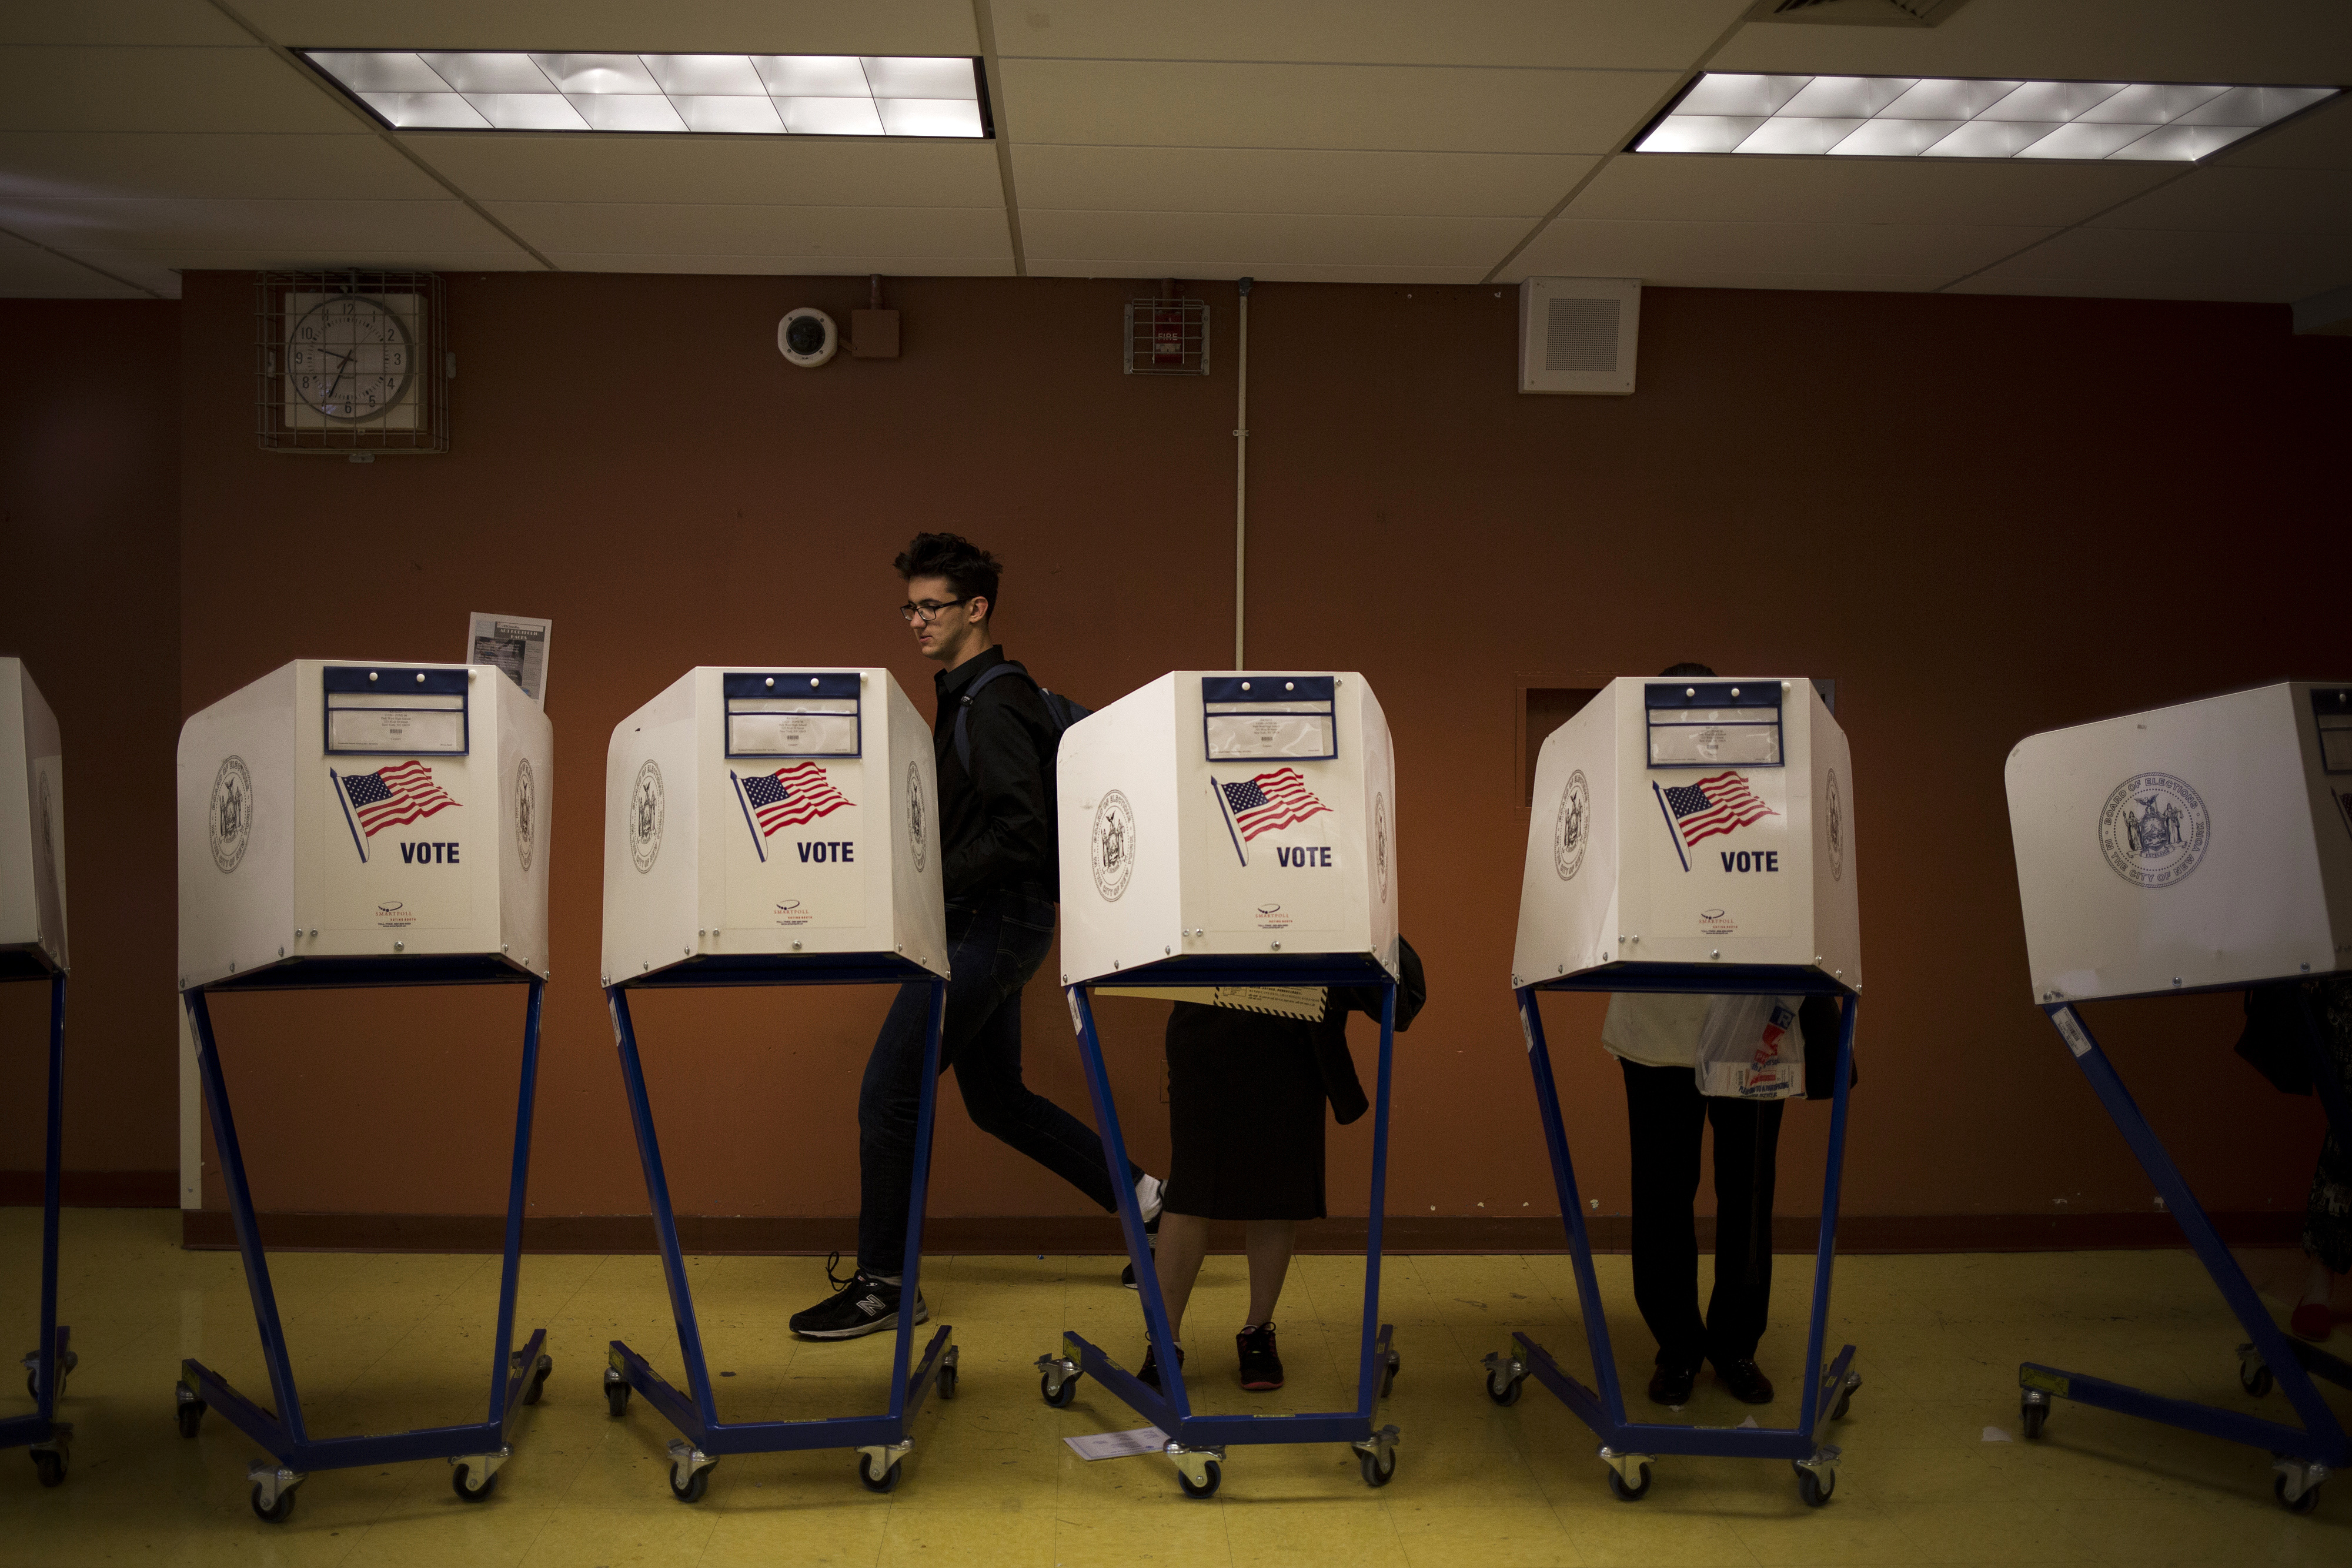 Residents cast ballots during the presidential primary vote at a polling location in New York on April 19, 2016. (Bloomberg/Getty Images)